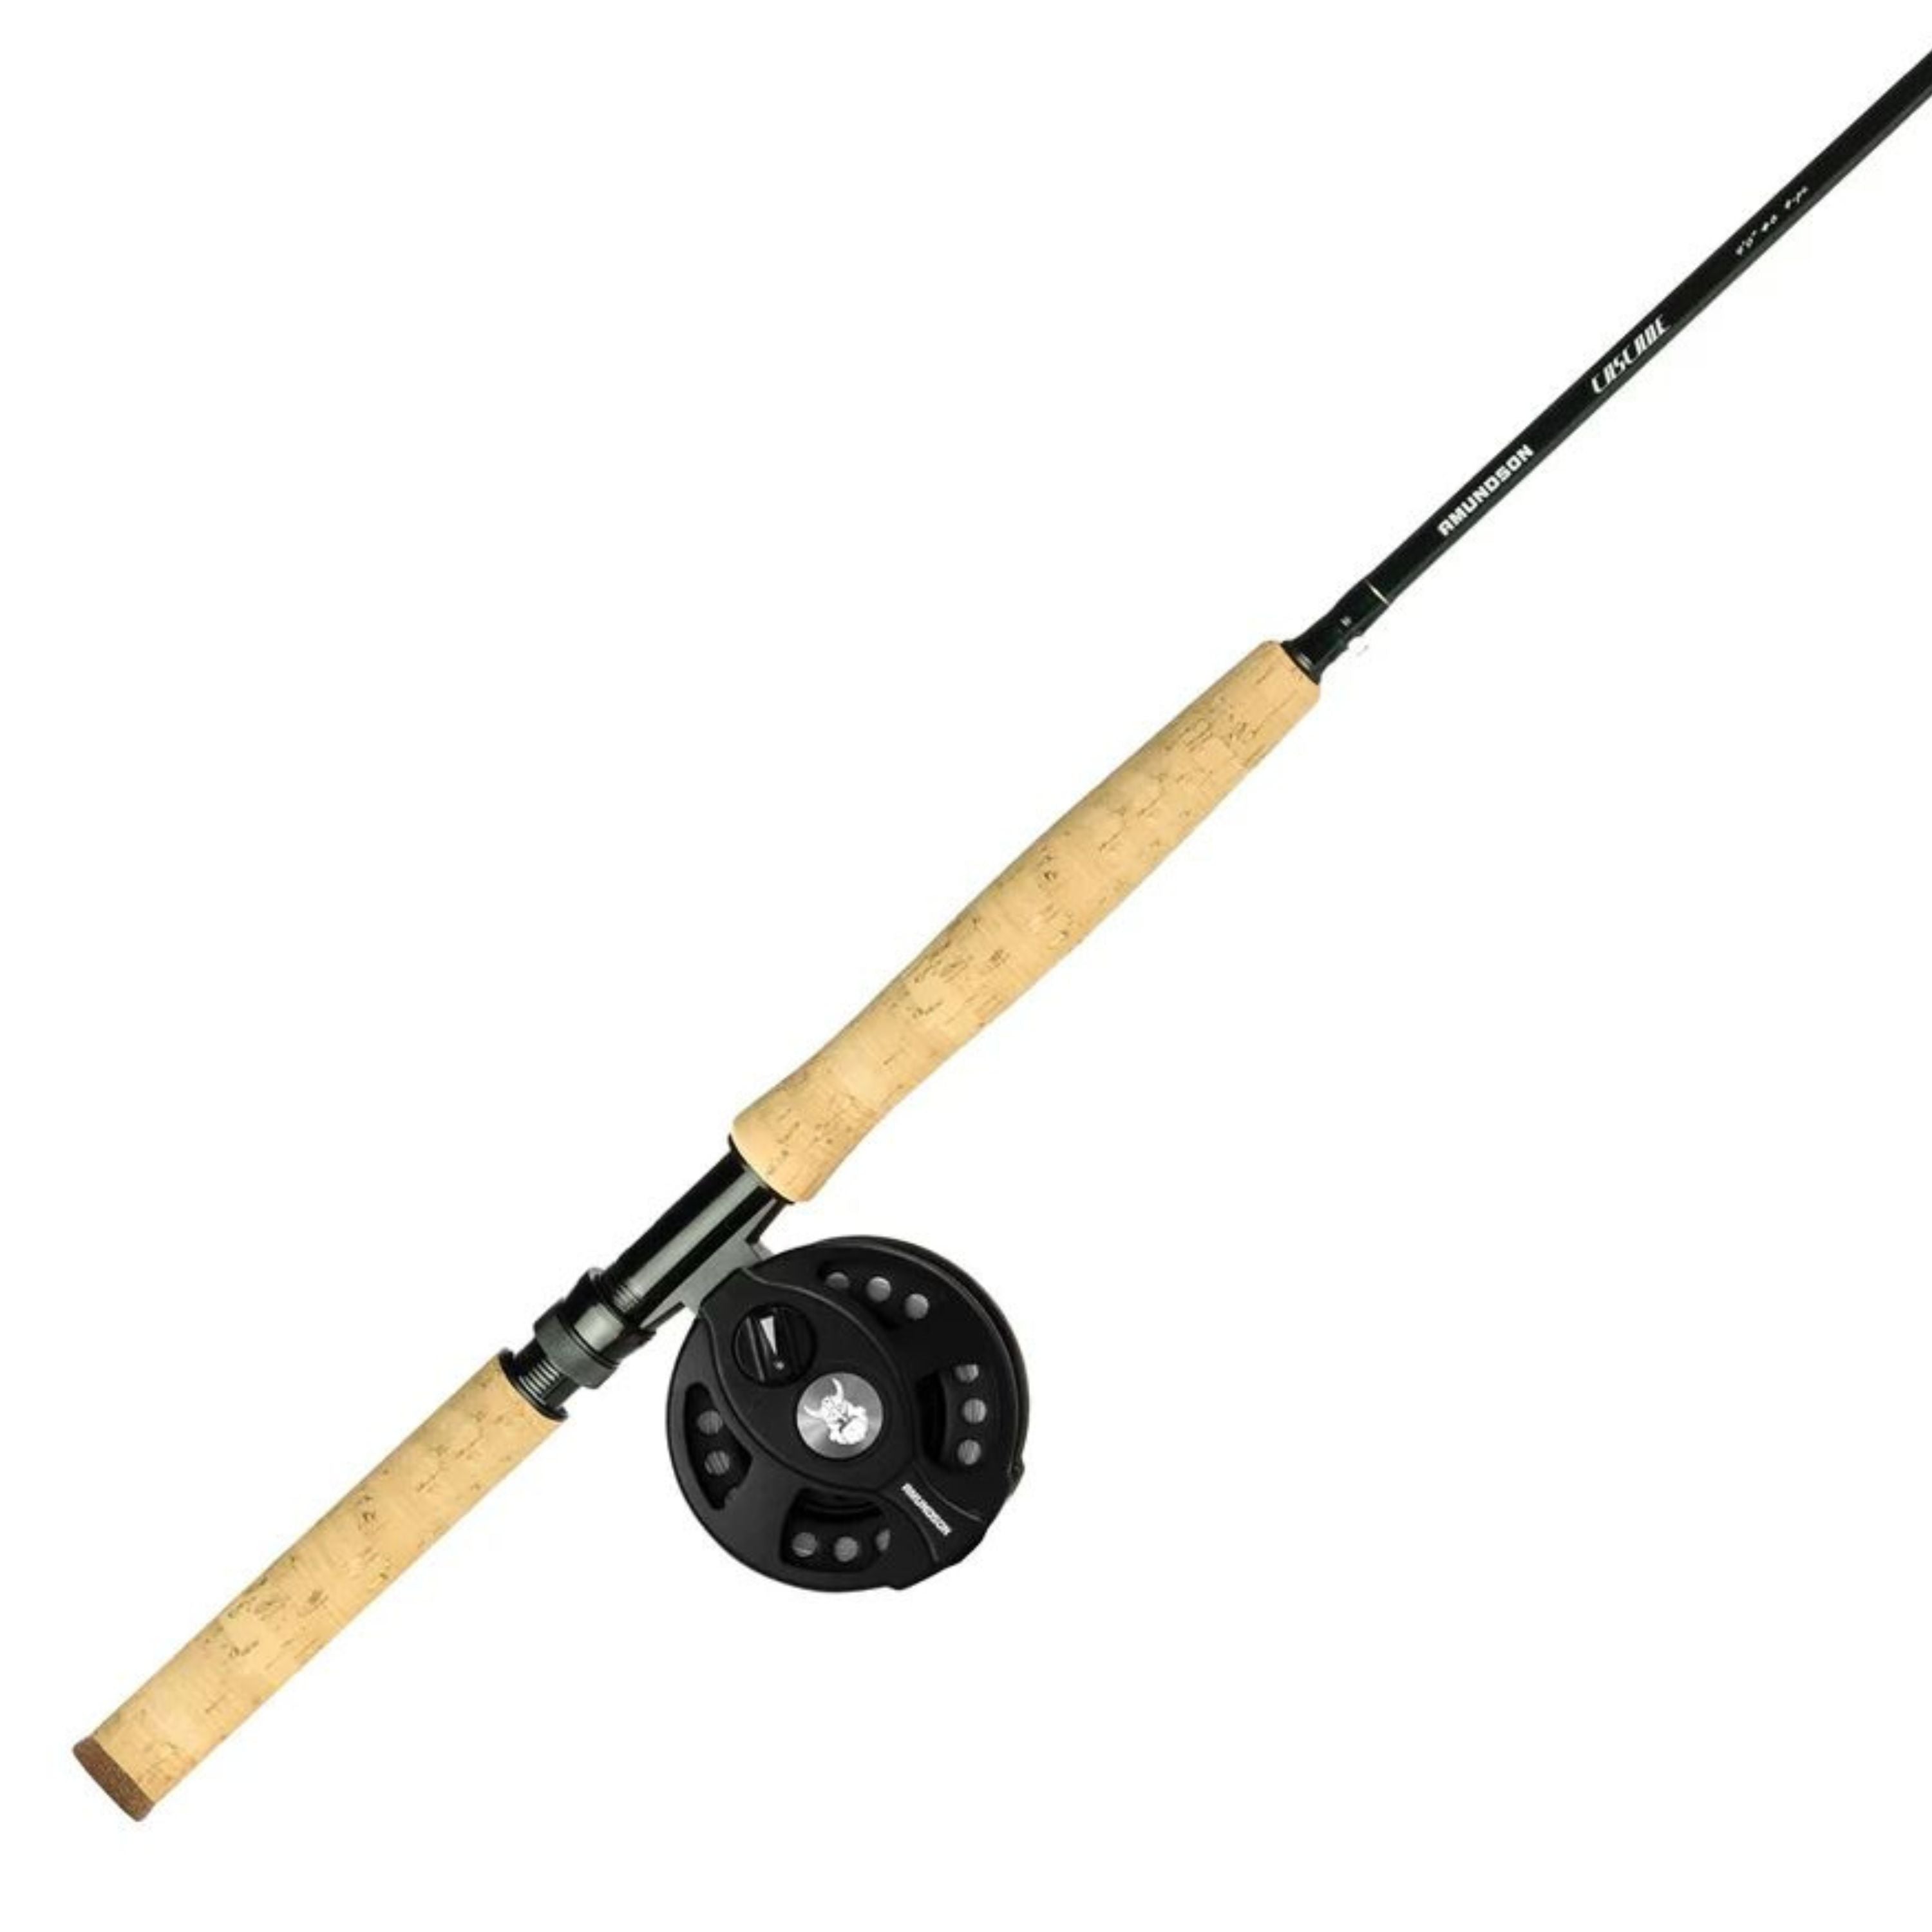 "Cascade" Fly fishing combo with #6 sinking fly line